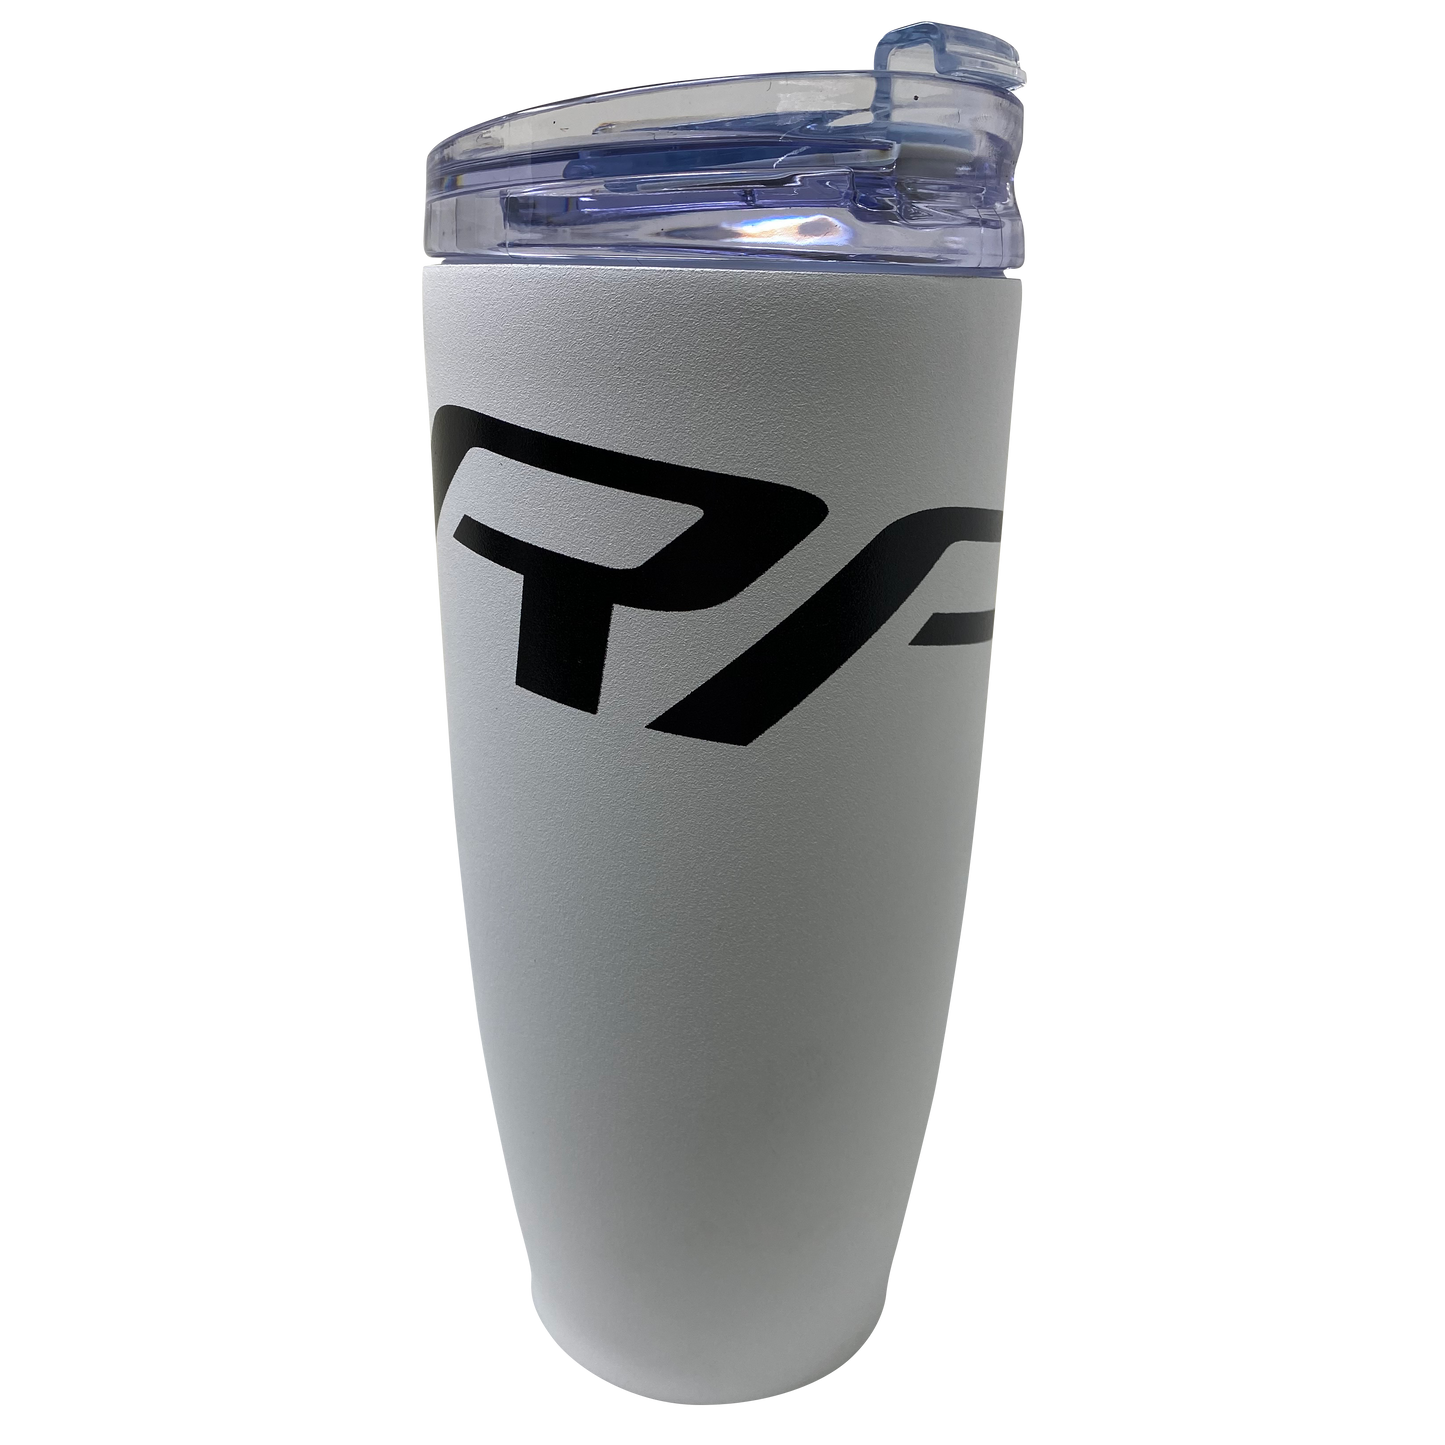 RPM Black and White Tumbler Cups!